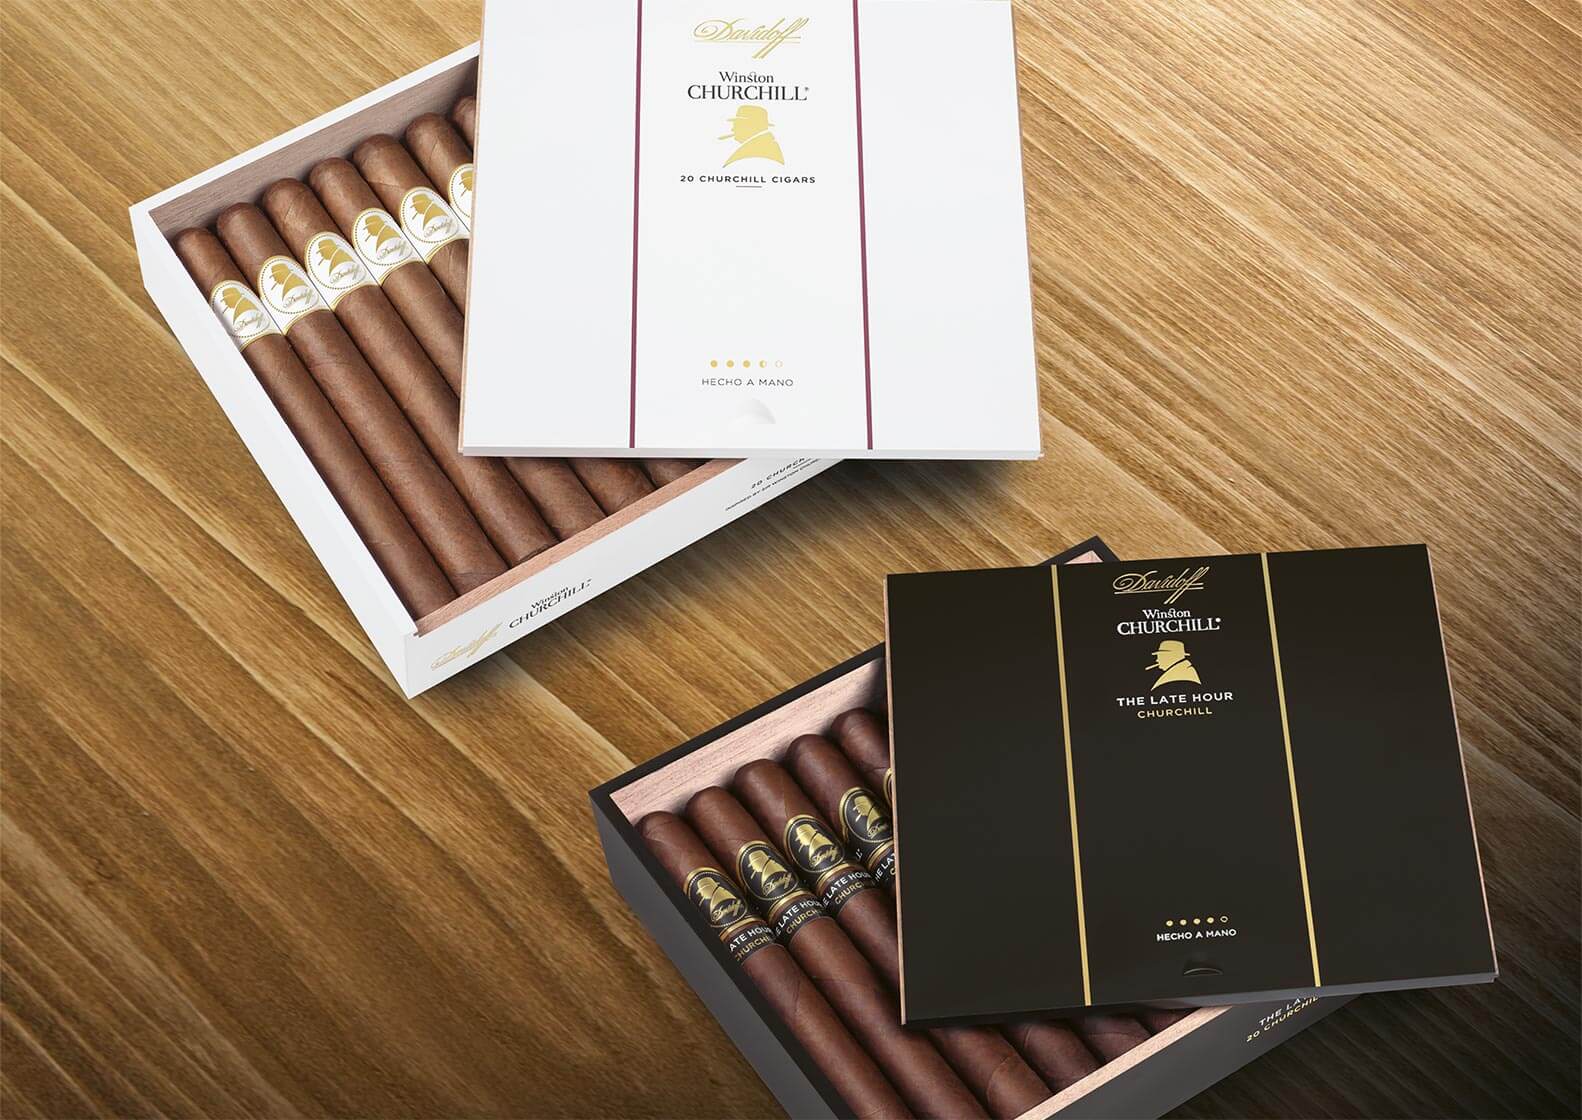 Open Davidoff Winston Churchill Original Series and Late Hour Collection Cigar Boxes on a wooden underground